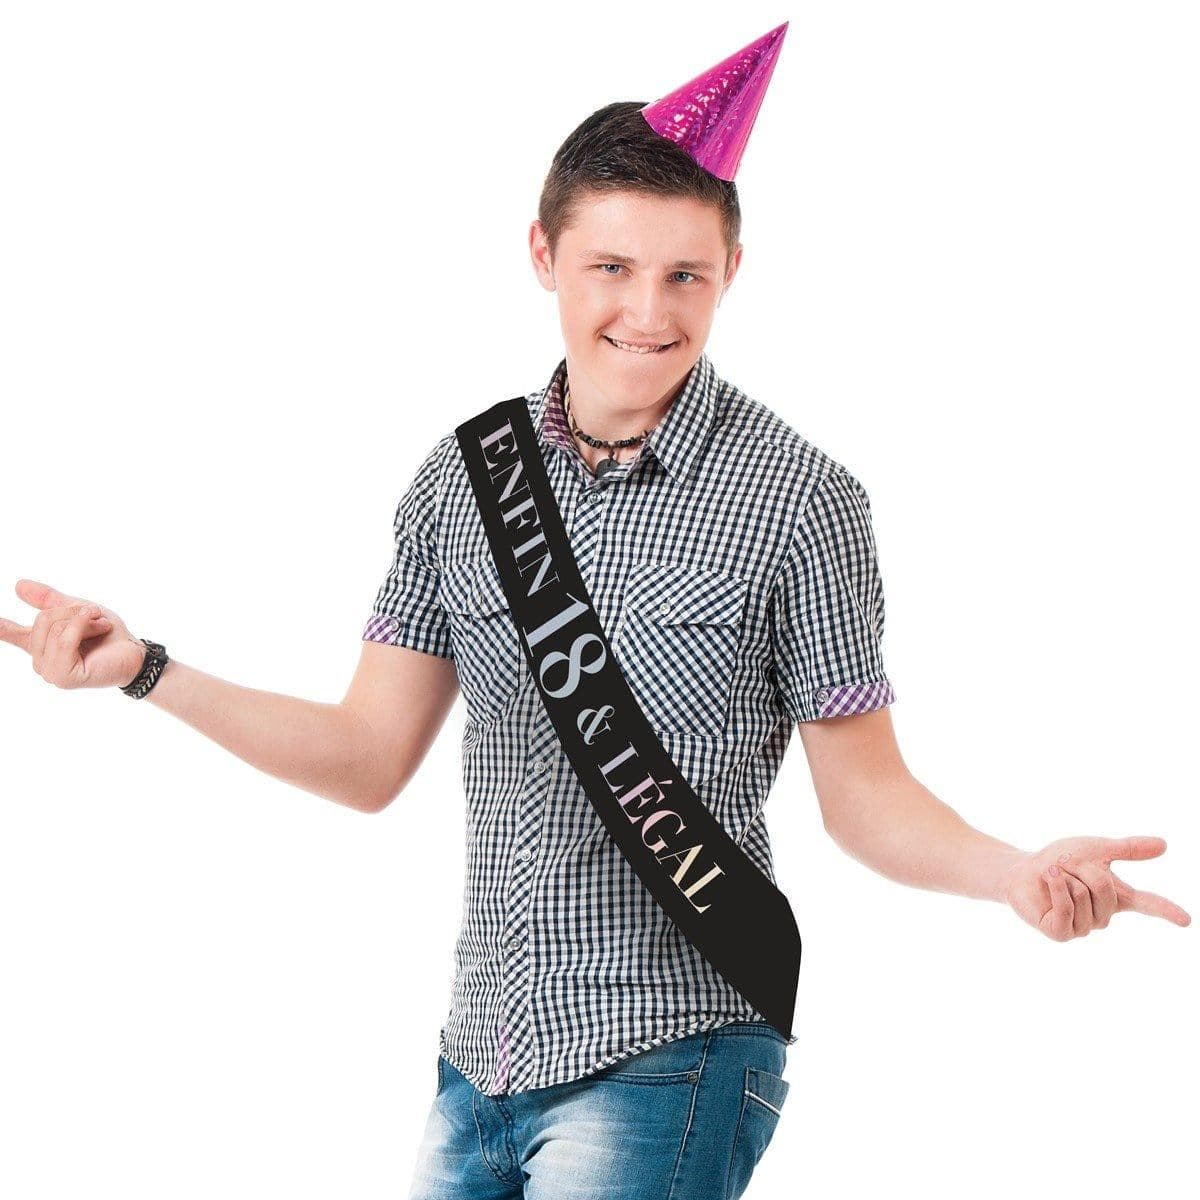 Buy Age Specific Birthday Sash - Enfin 18 Ans , 18th Birthday sold at Party Expert